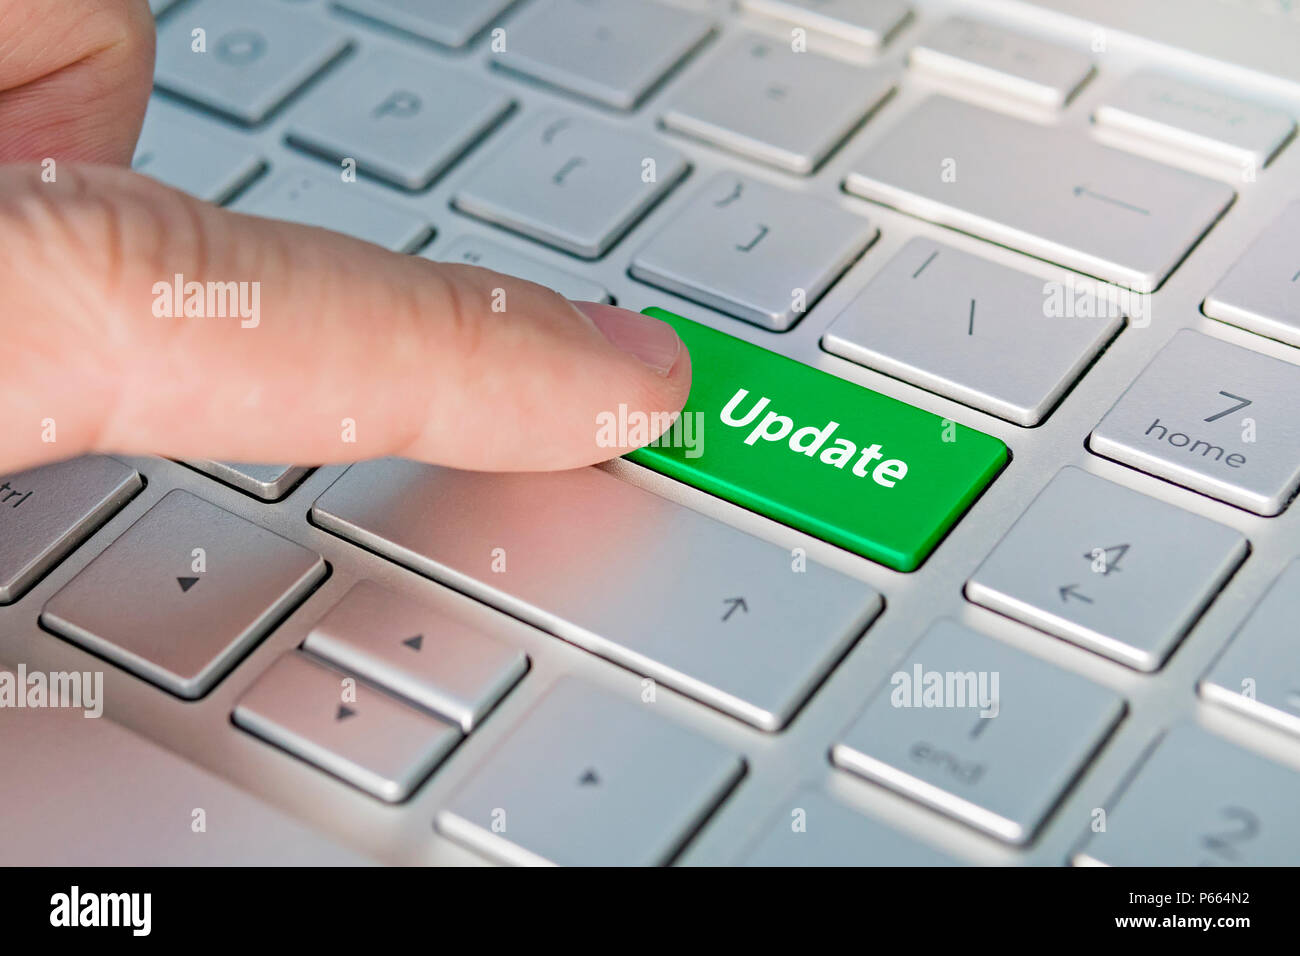 Computer notebook keyboard with Update key - technology background. update inscriptions on the grey silver keyboard button close up, green button. Stock Photo